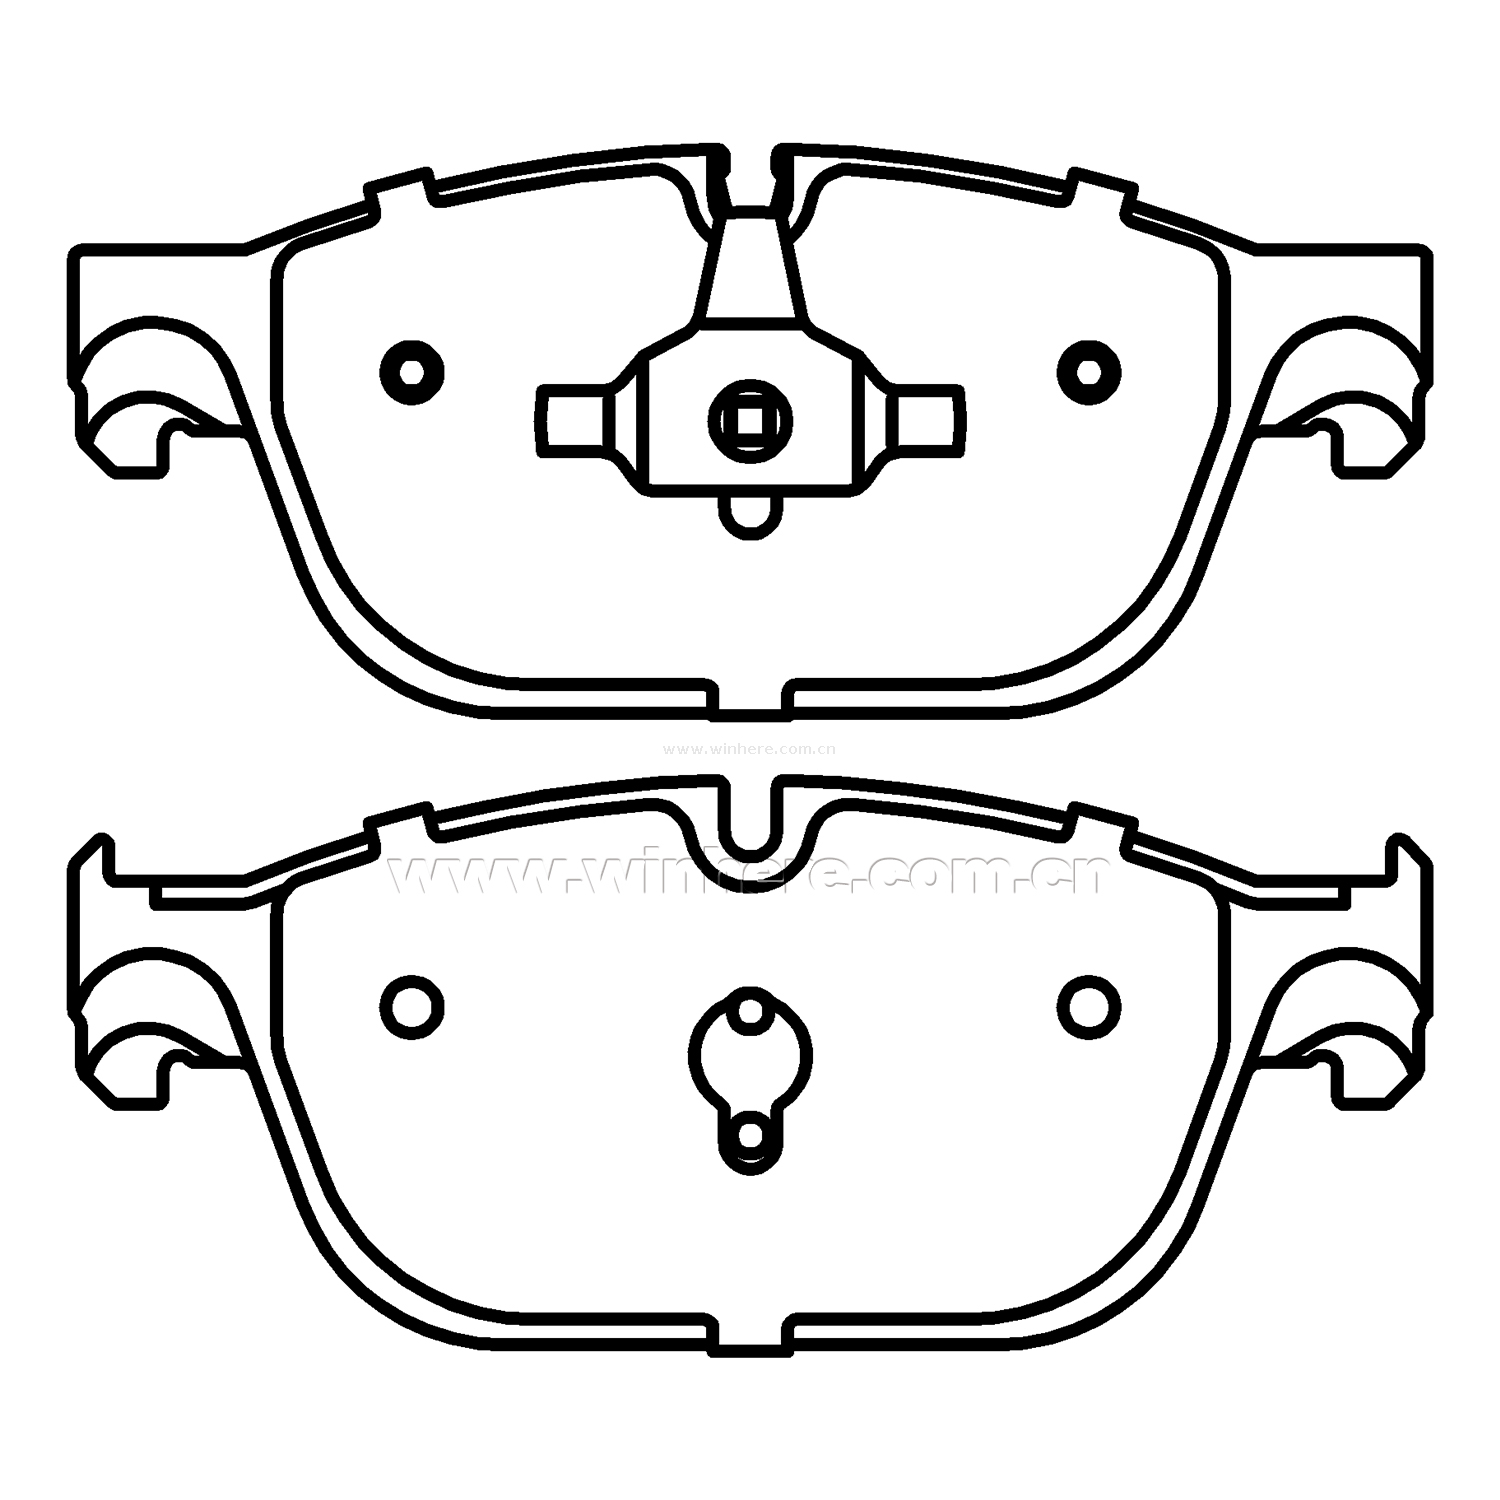 Front Brake Pad for PEUGEOT with Backing Plate